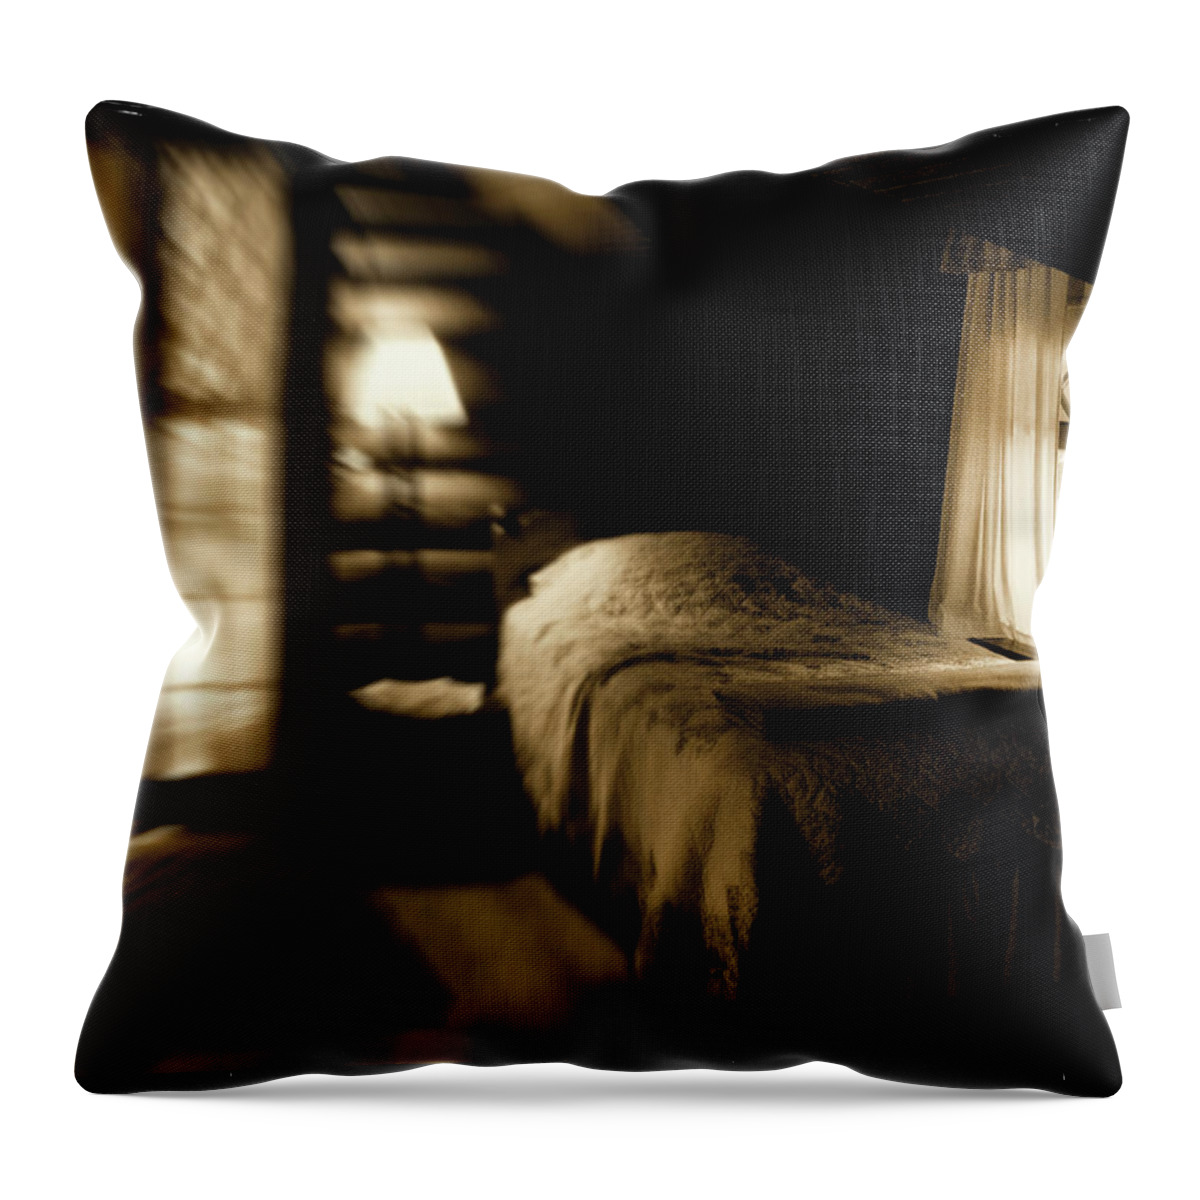 Log Cabin Throw Pillow featuring the photograph Open Spaces For Dreaming by Cynthia Dickinson